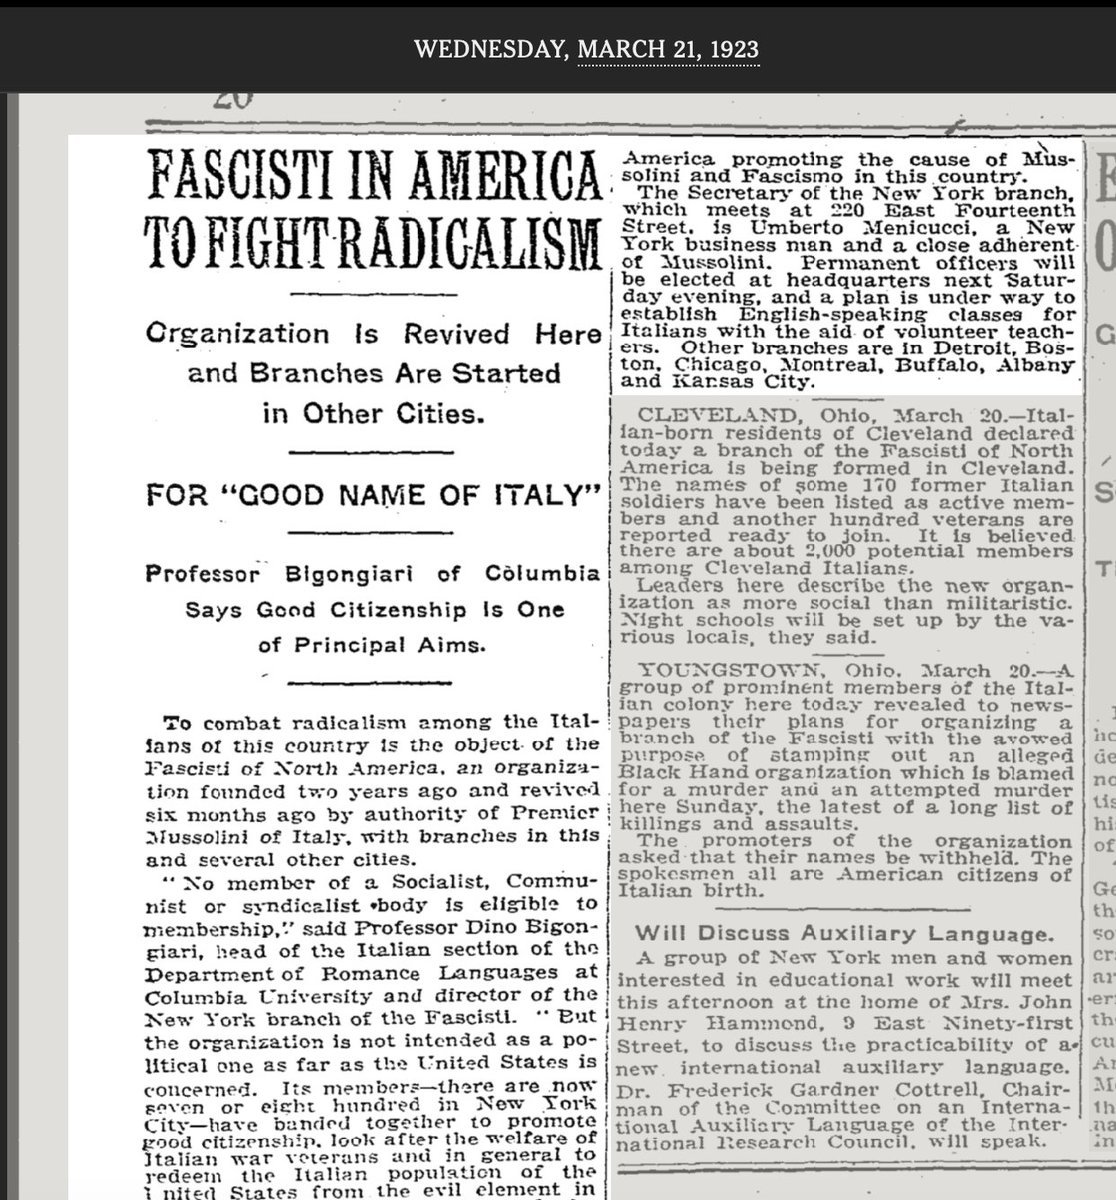 American liberals hoping for fascist to fight the unions in 1923